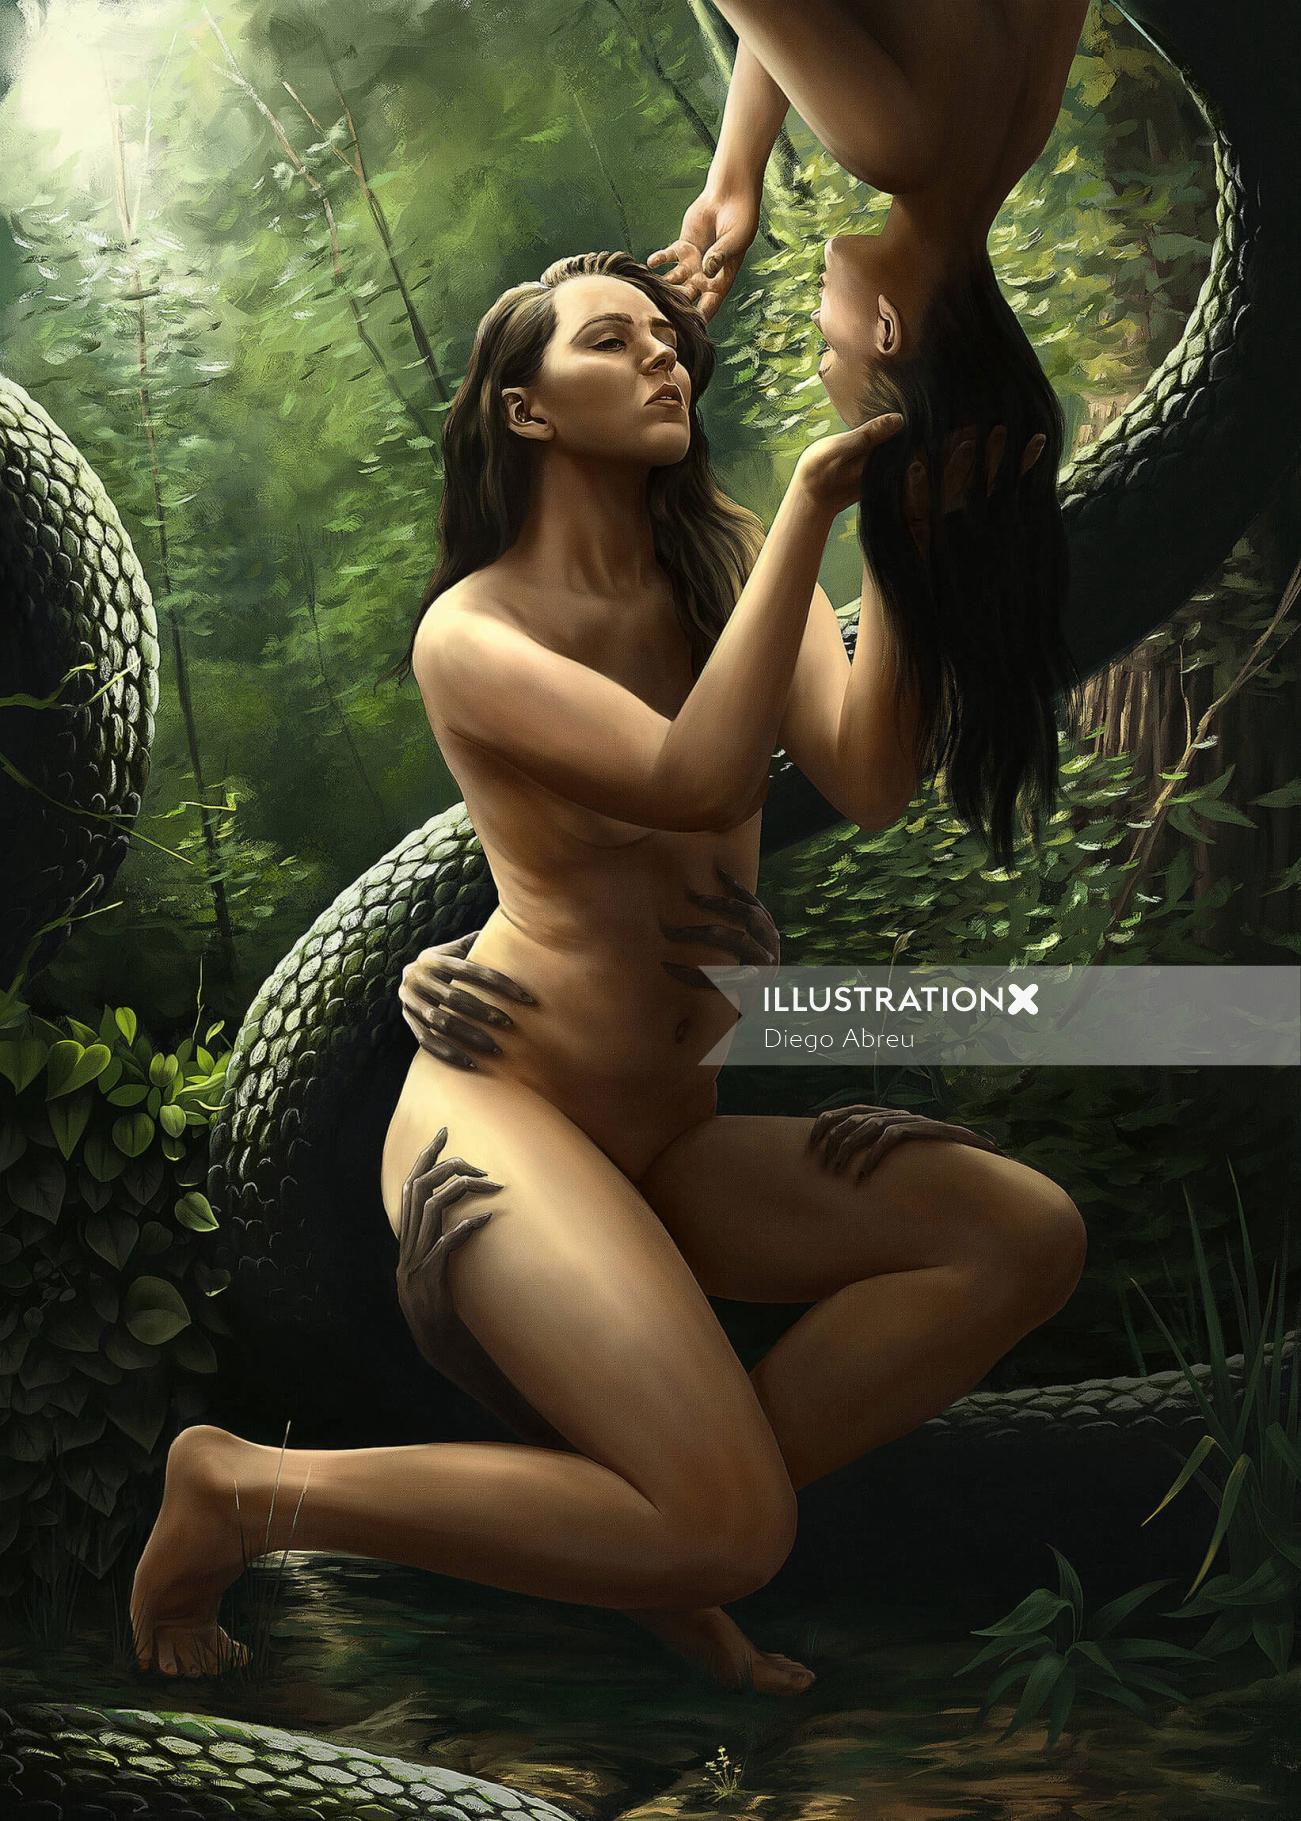 Concept of the moment when Eve admires the fruit from the tree